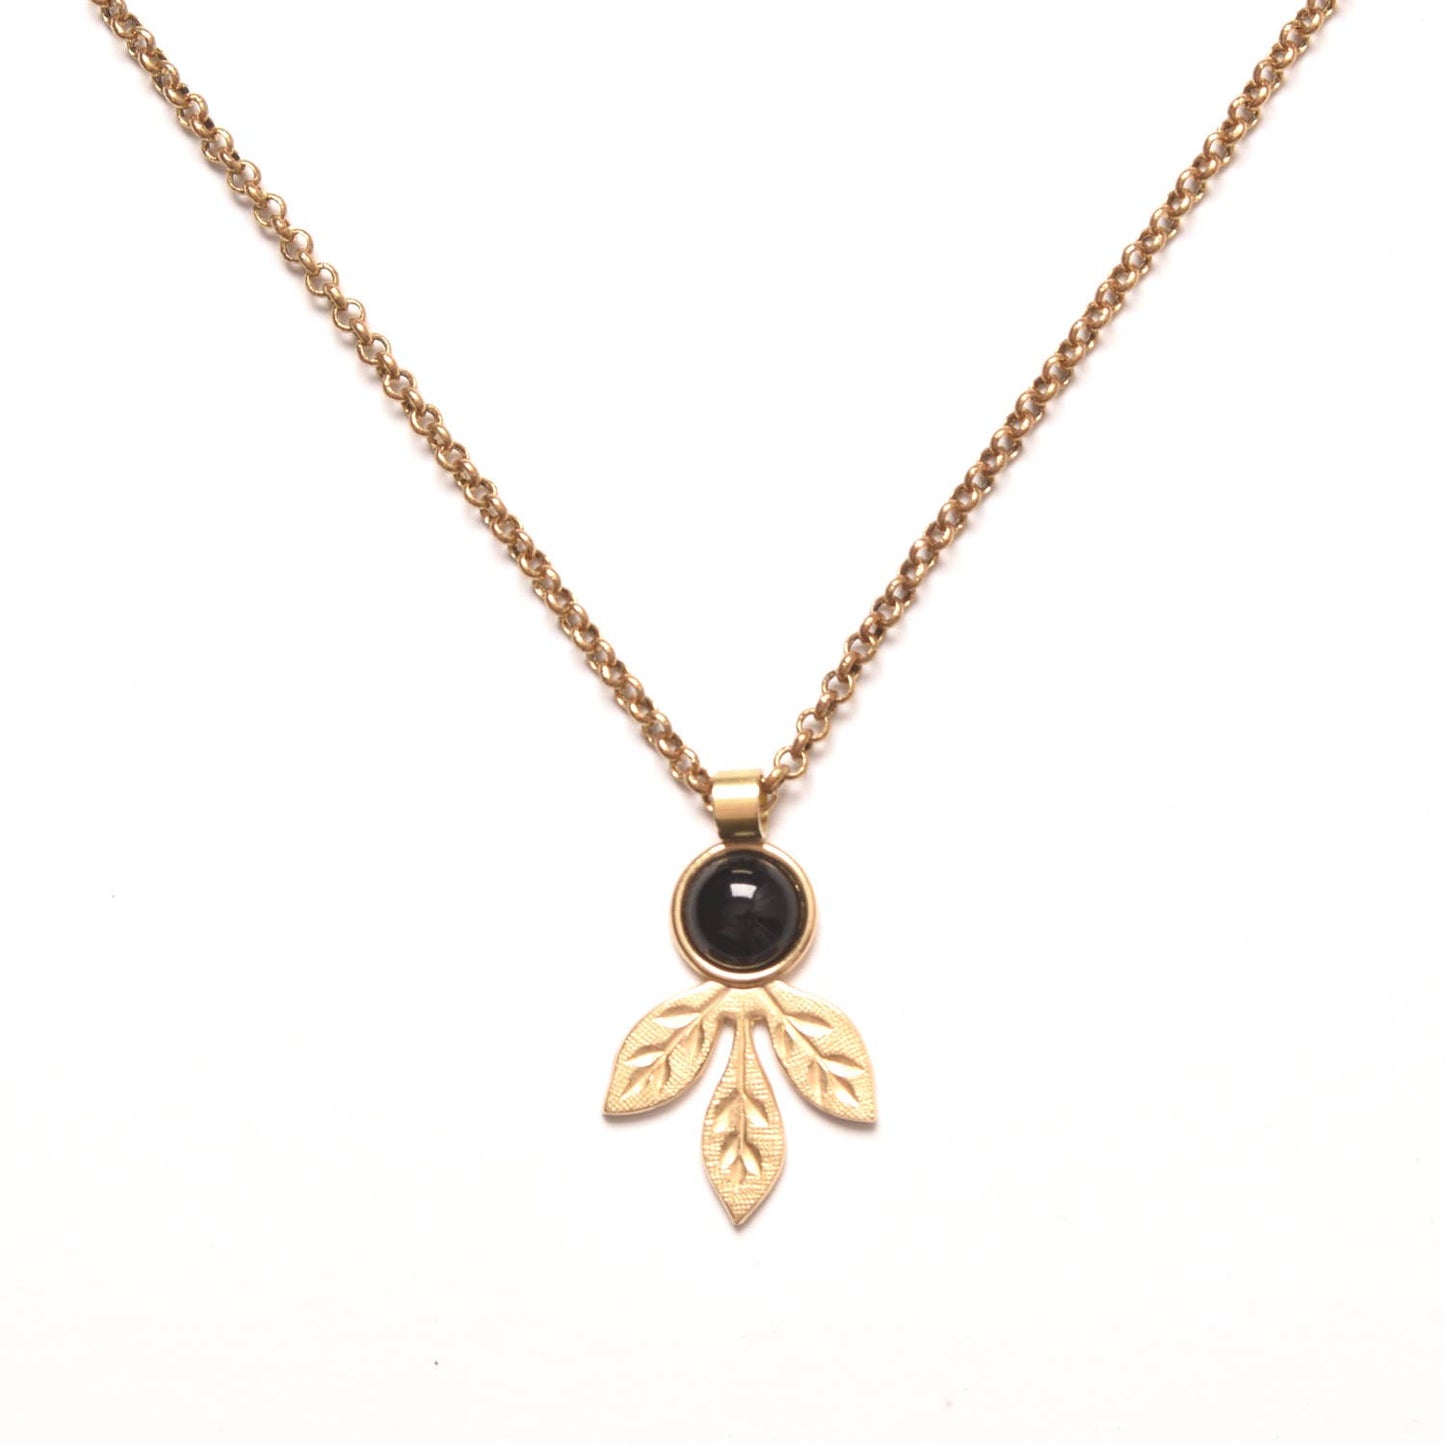 Engraved Leaf Necklace with Onyx